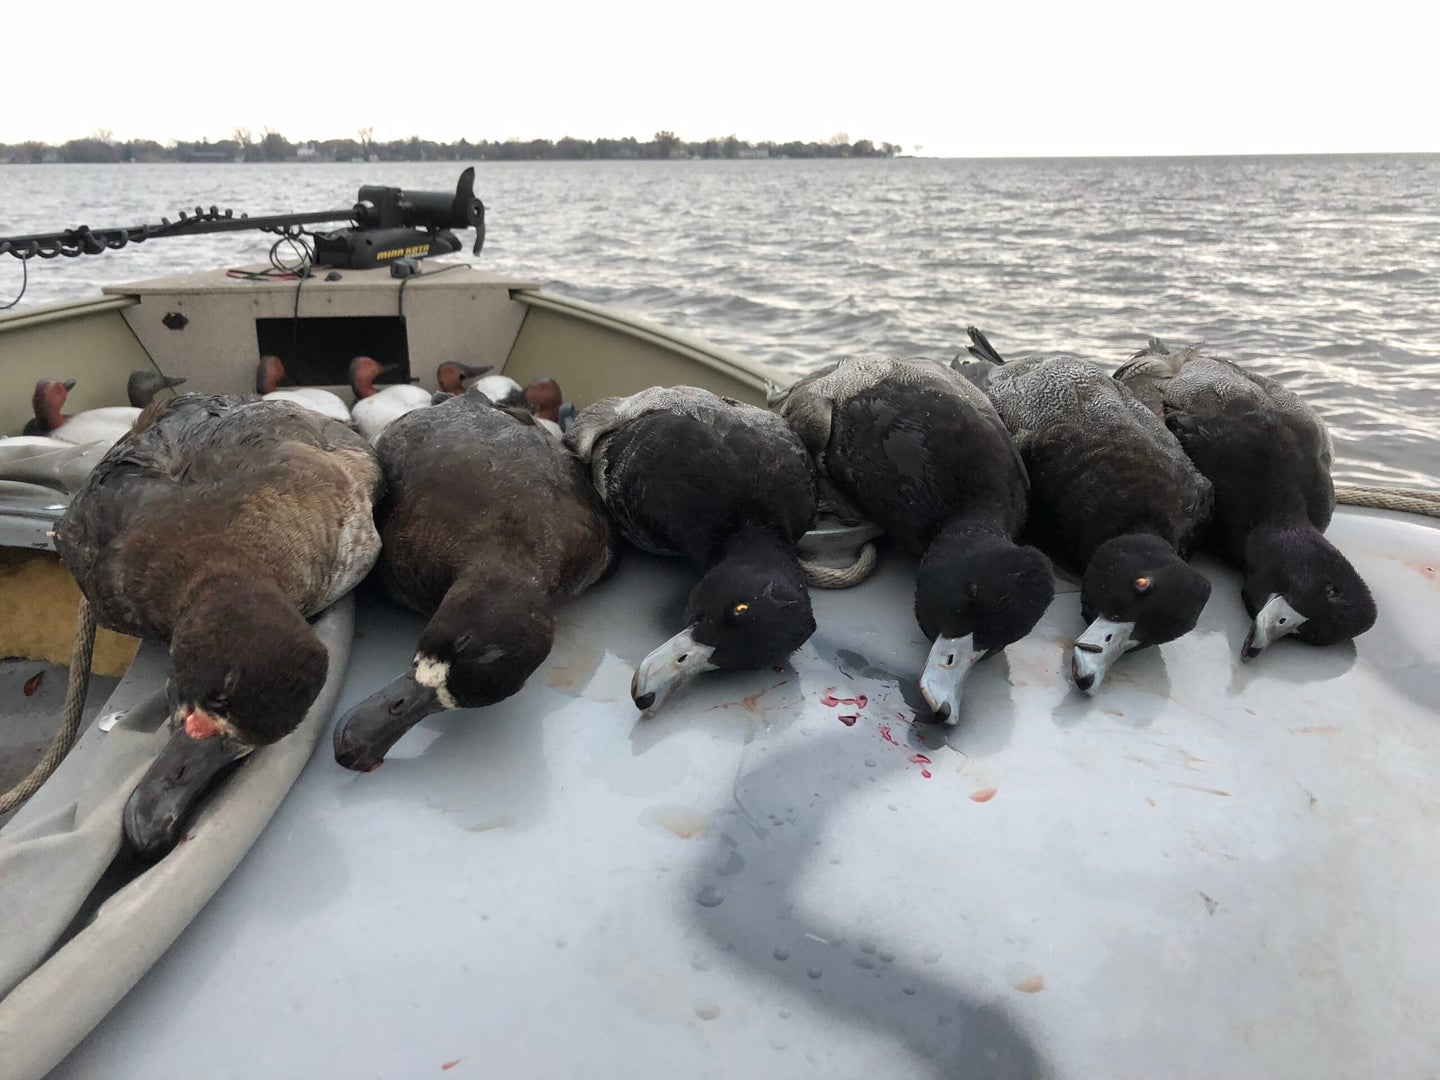 A mixed back of diving ducks after a duck hunt